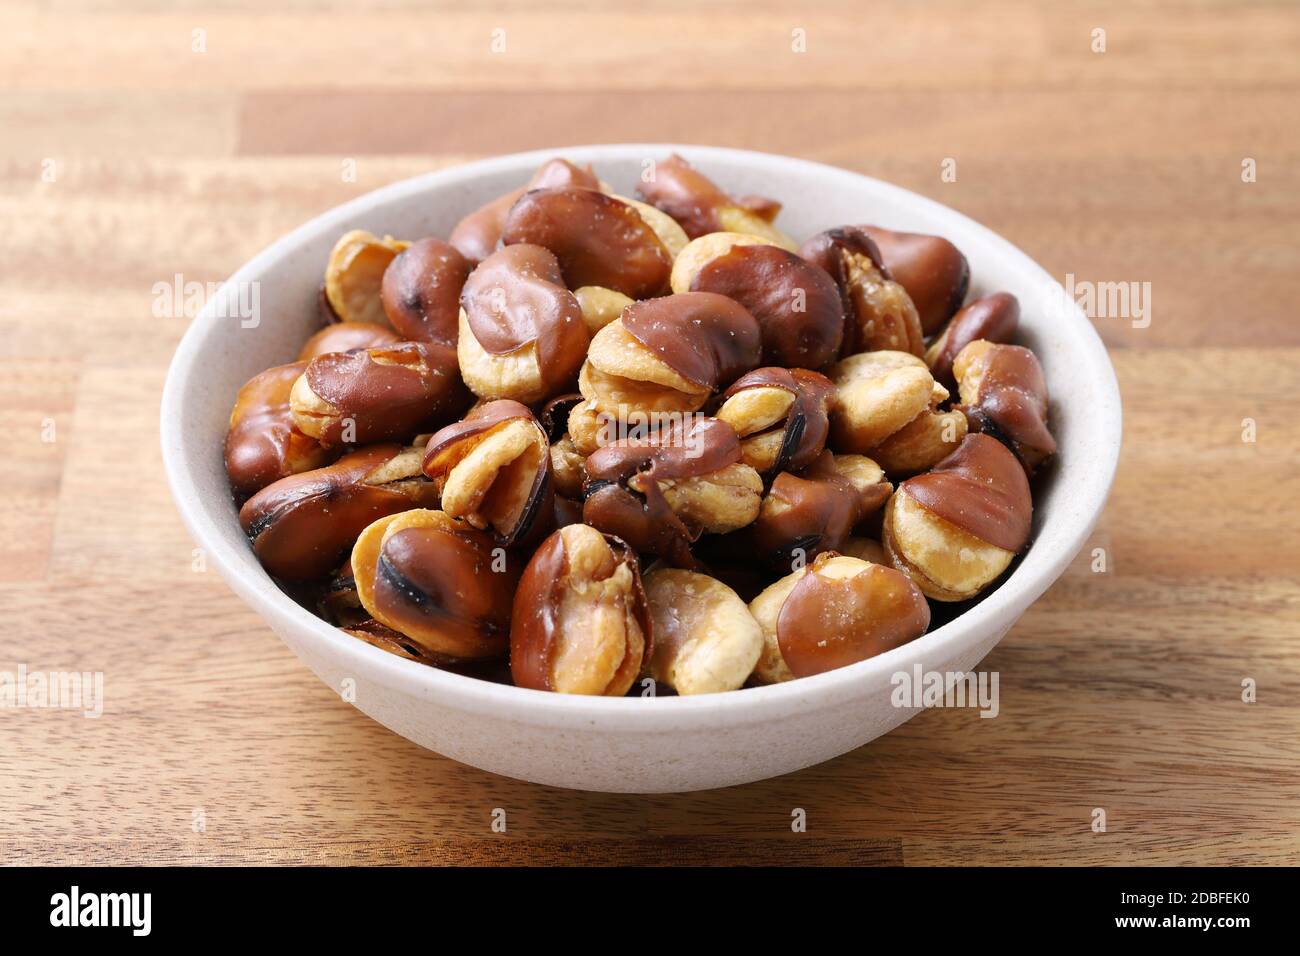 Japanese food, Snack of fried broad beans in a dish Stock Photo